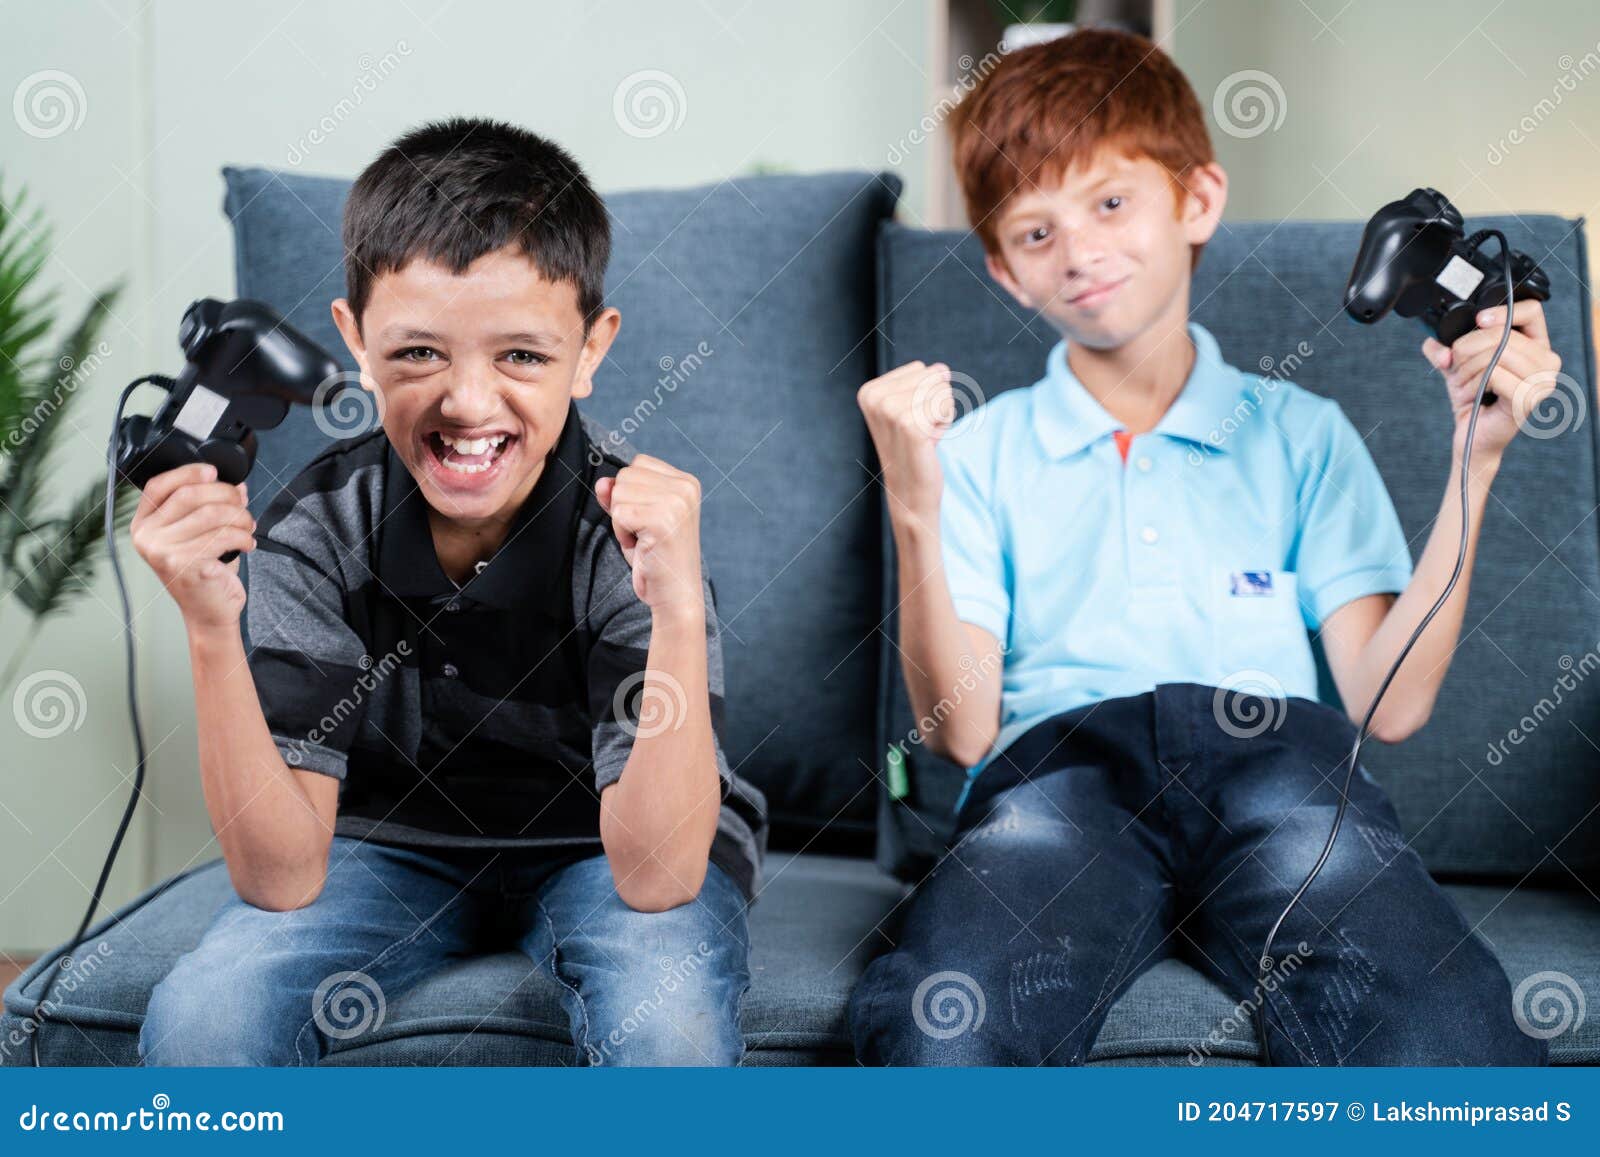 Point of View Shot, Two Kids Cheering and Shouting after Won the Online Video Game Match while Playing with Joystick or Gamepad at Stock Image